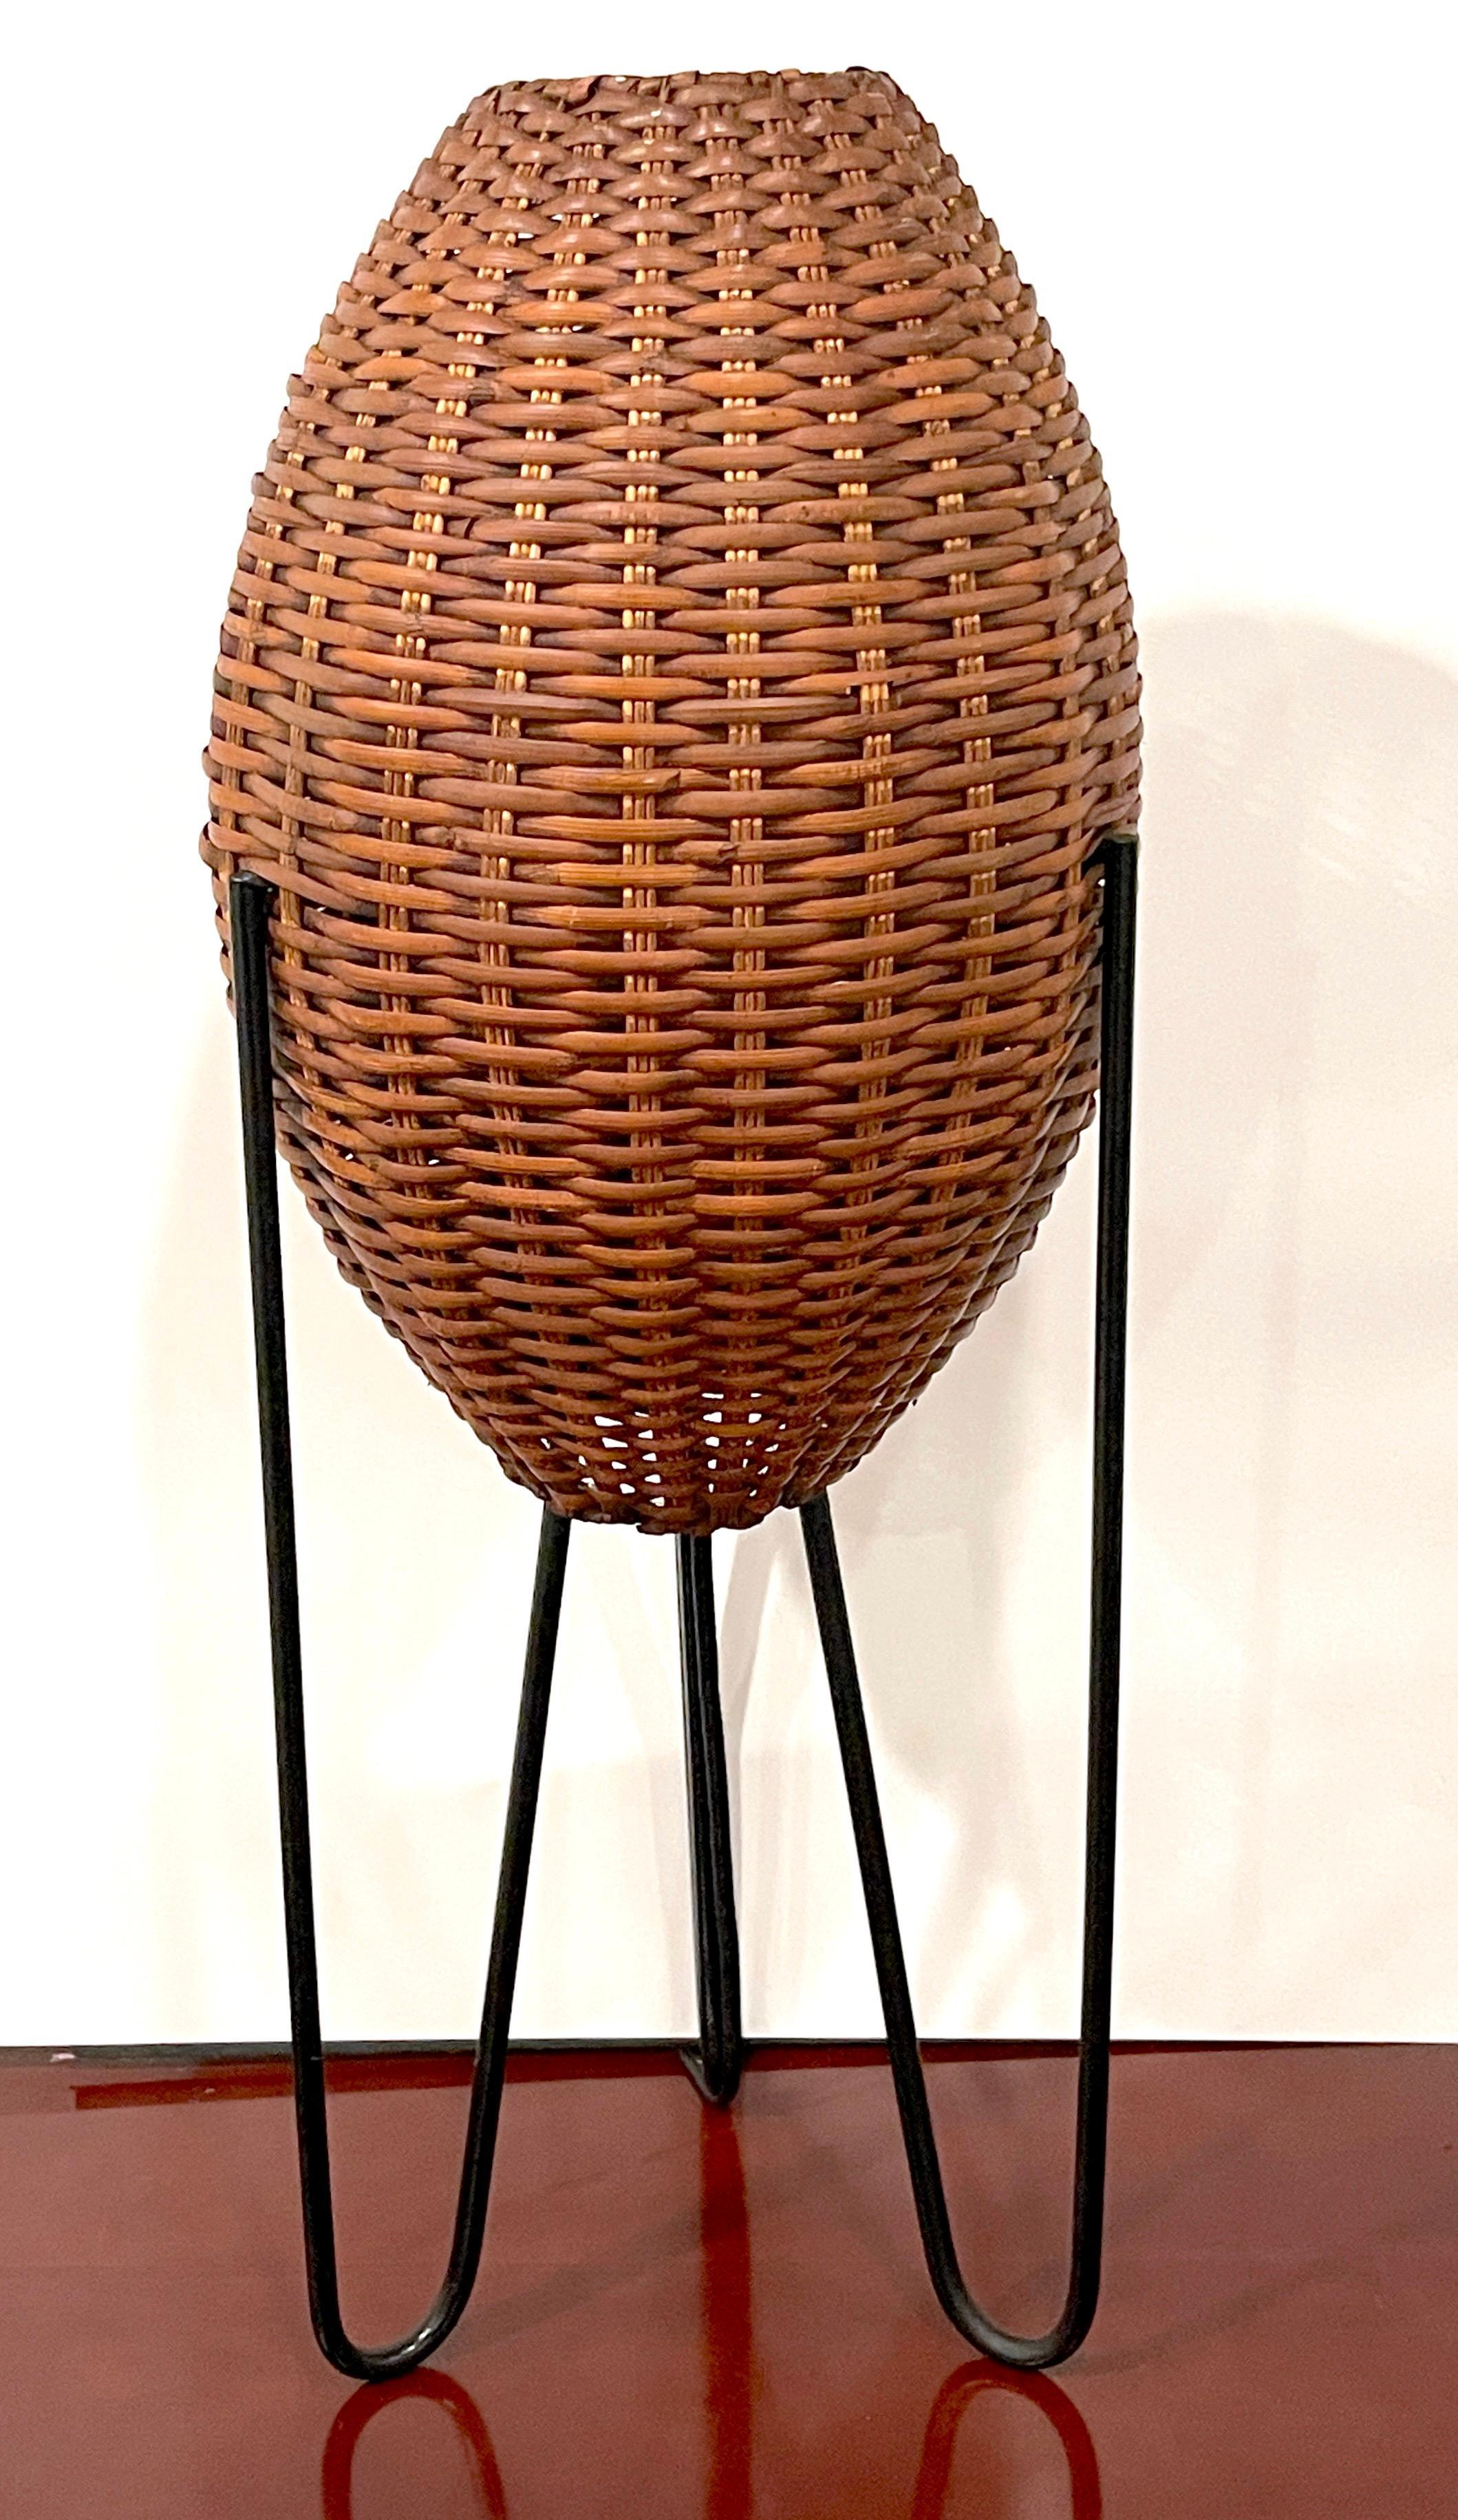 Paul Mayen Wicker 'Beehive' table lamp, circa 1965
Designed and produced by Paul Mayen

Paul Mayen Wicker 'Beehive' table lamp, circa 1965, both designed and produced by the renowned designer Paul Mayen. Standing at 27 inches tall, this lamp retains